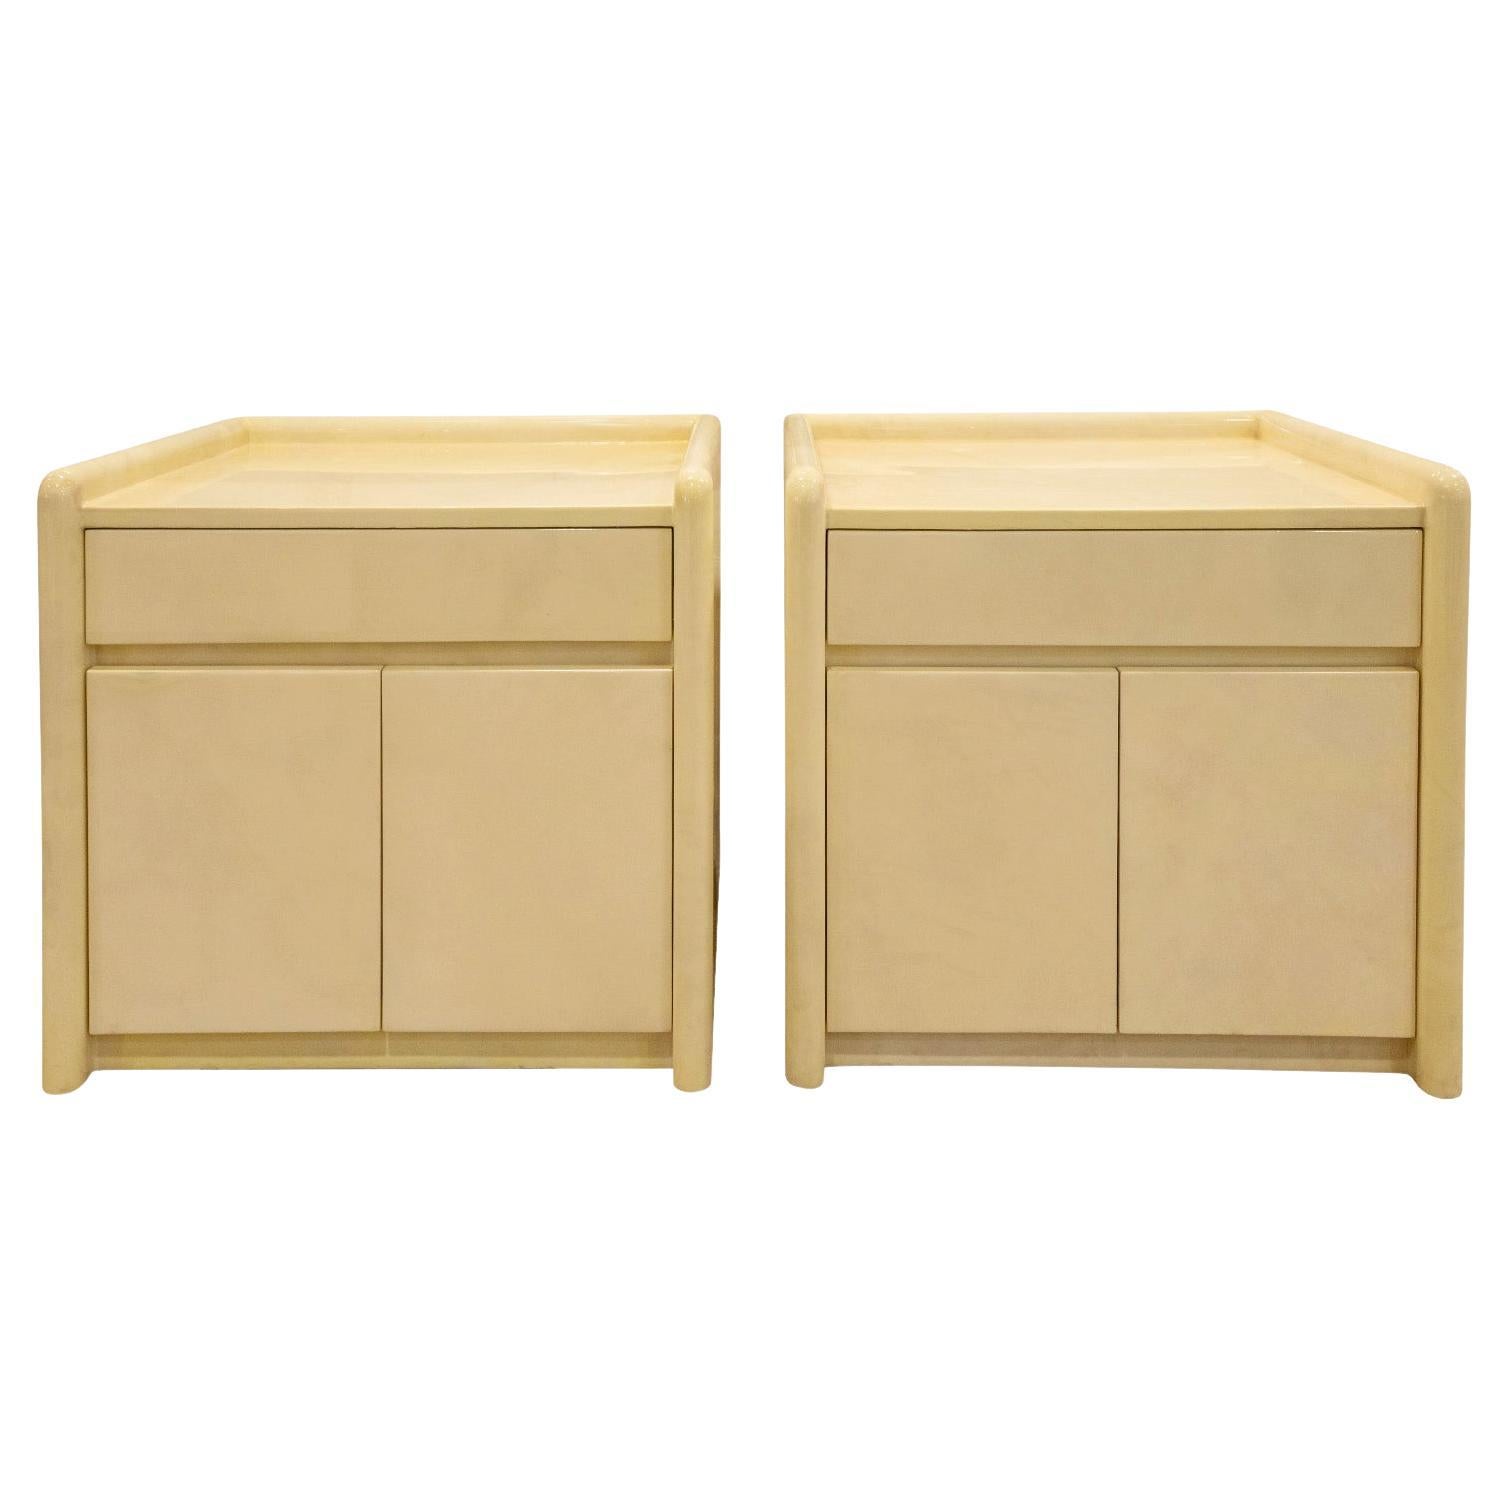 Karl Springer Rare & Exceptional Pair of Lacquered Goatskin Bedside Tables 1985 For Sale